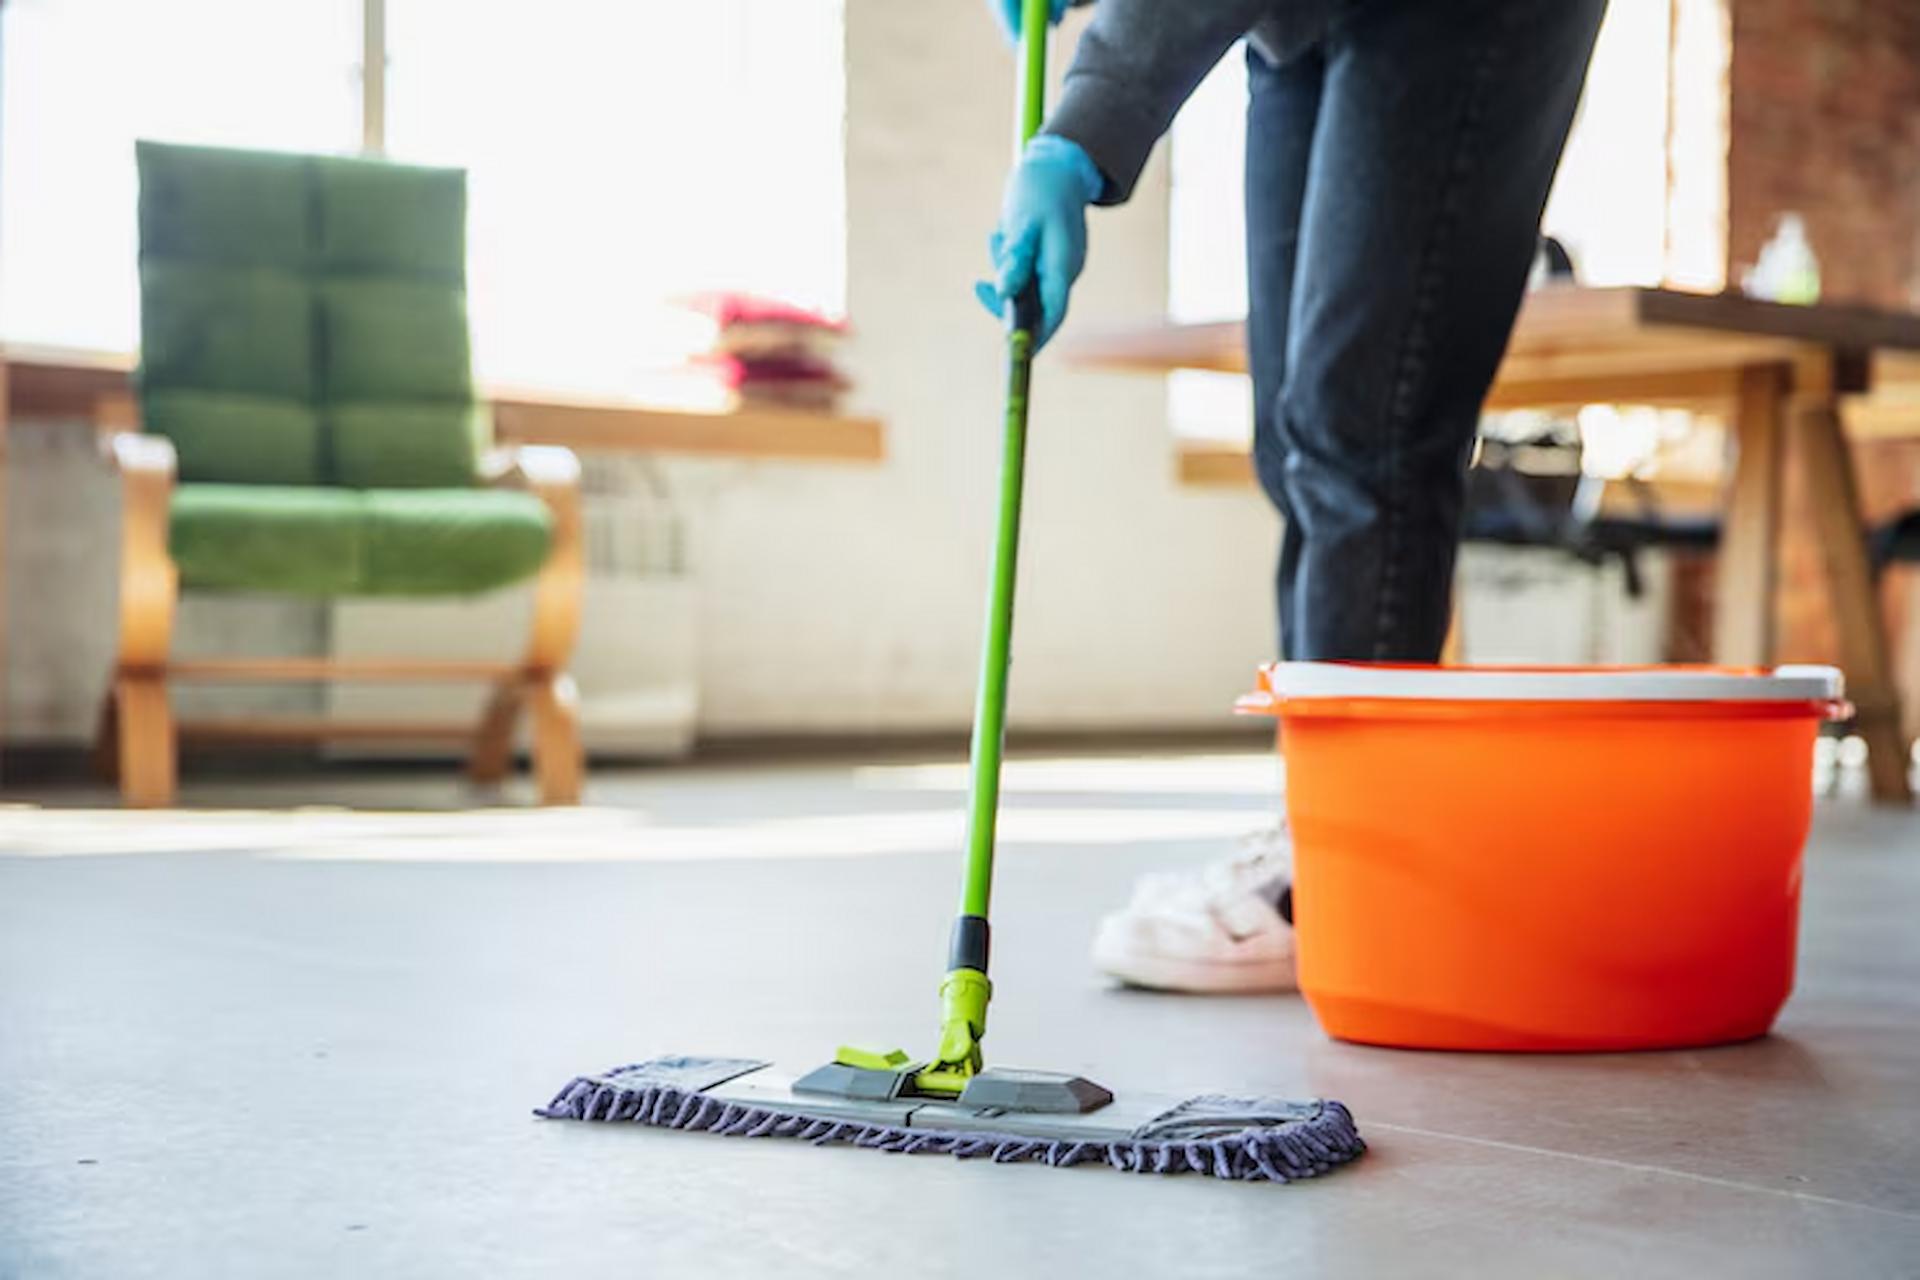 3 Questions to Ask a Potential Housekeeper